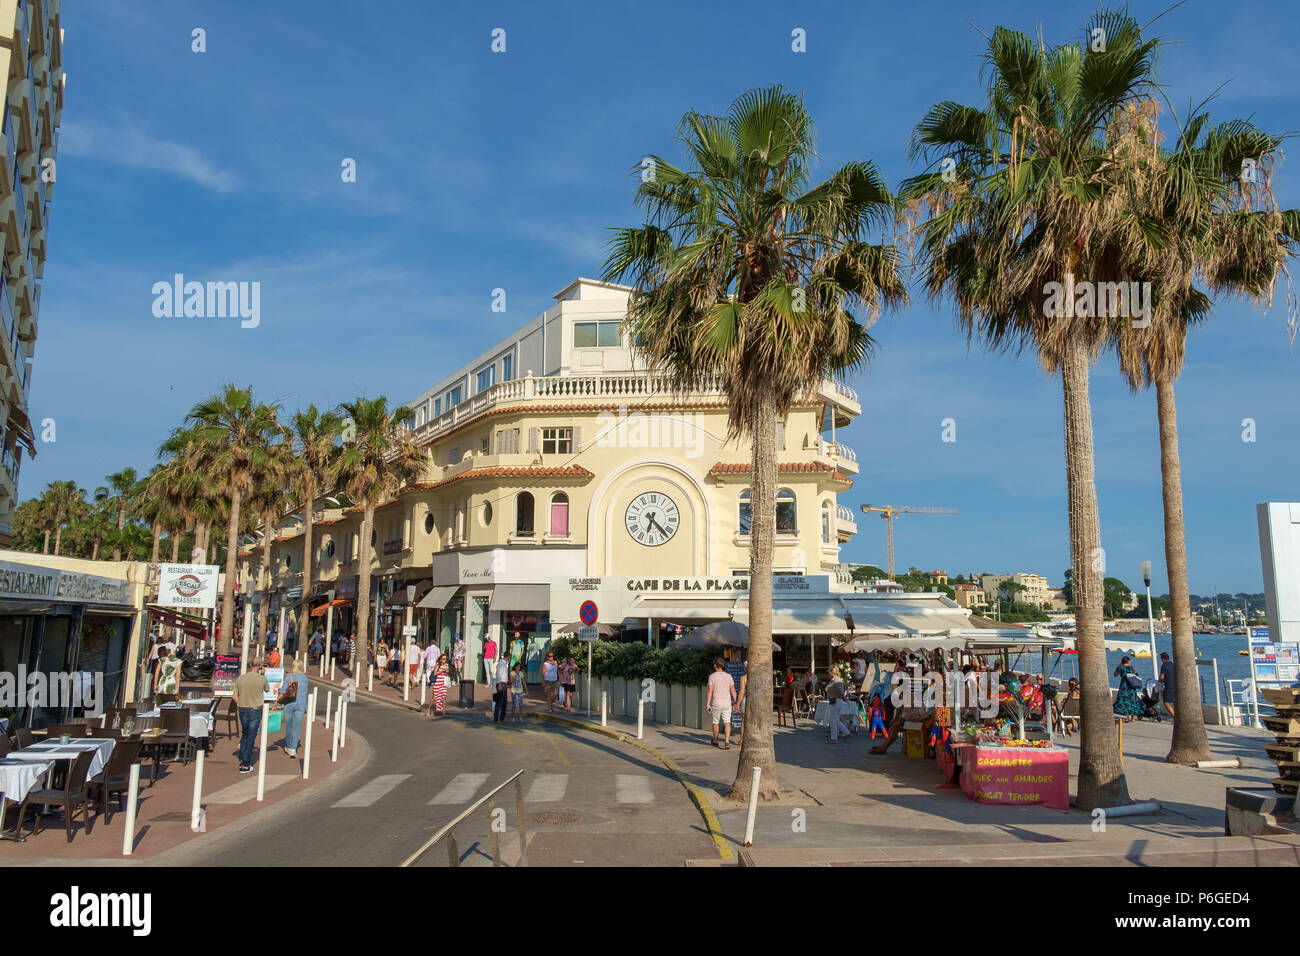 Juan Les Pins High Resolution Stock Photography and Images - Alamy